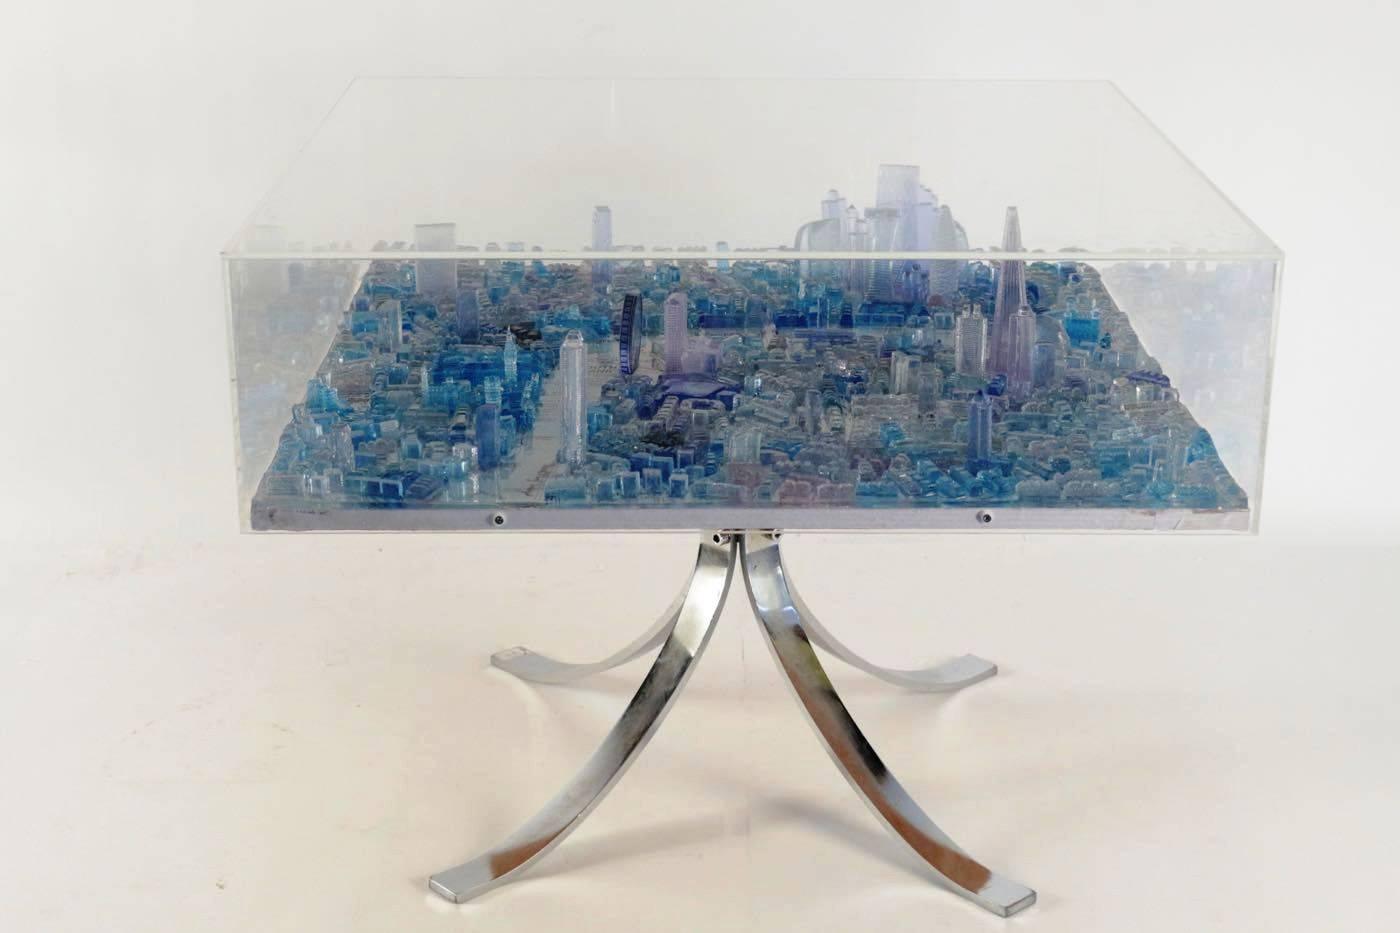 Fabulous coffee or side table by Grigoris Lagos, molded resin, 2015, unique piece
with 1970s table base
representing London
from the cityscapes series.